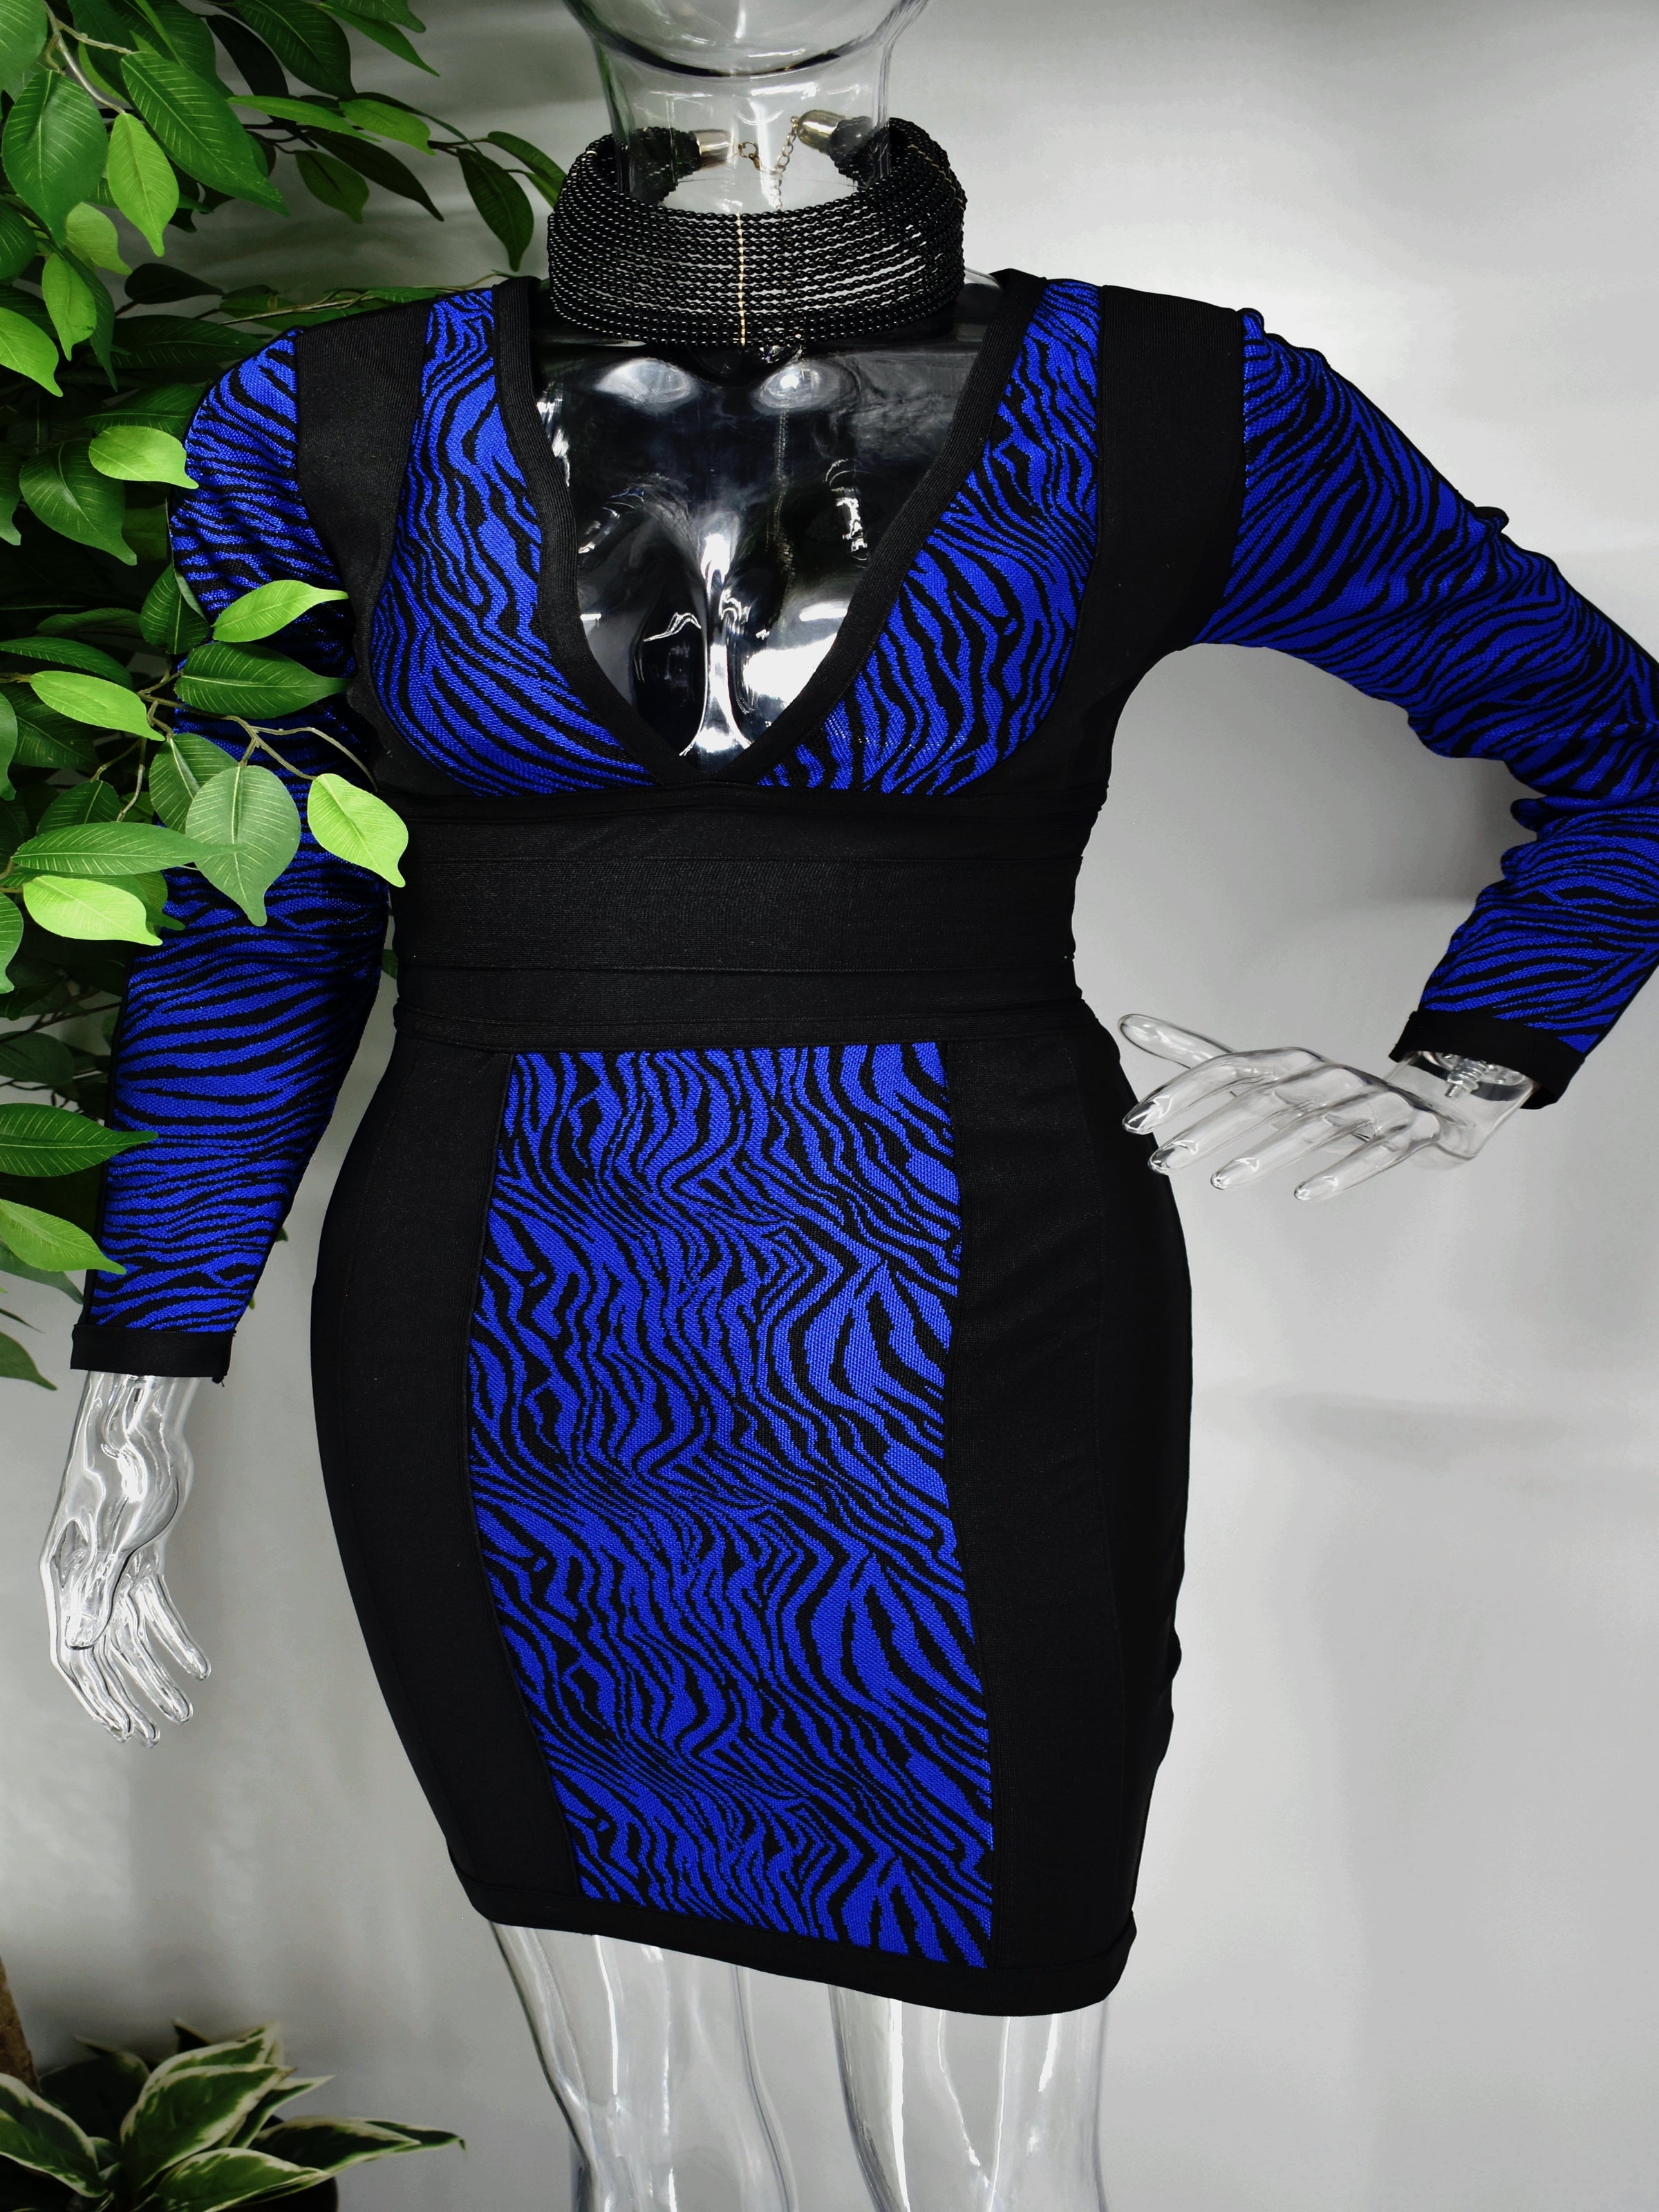 Our Bridgette Bandage dress brings that exotic vibe and is perfect for a night out. The bold blue and black tiger print centers this beauty which has a fitted bodice, long sleeves, and a plunging v-neck line. It is supported by a cinched waist and a fitted skirt which lands above the knee. 